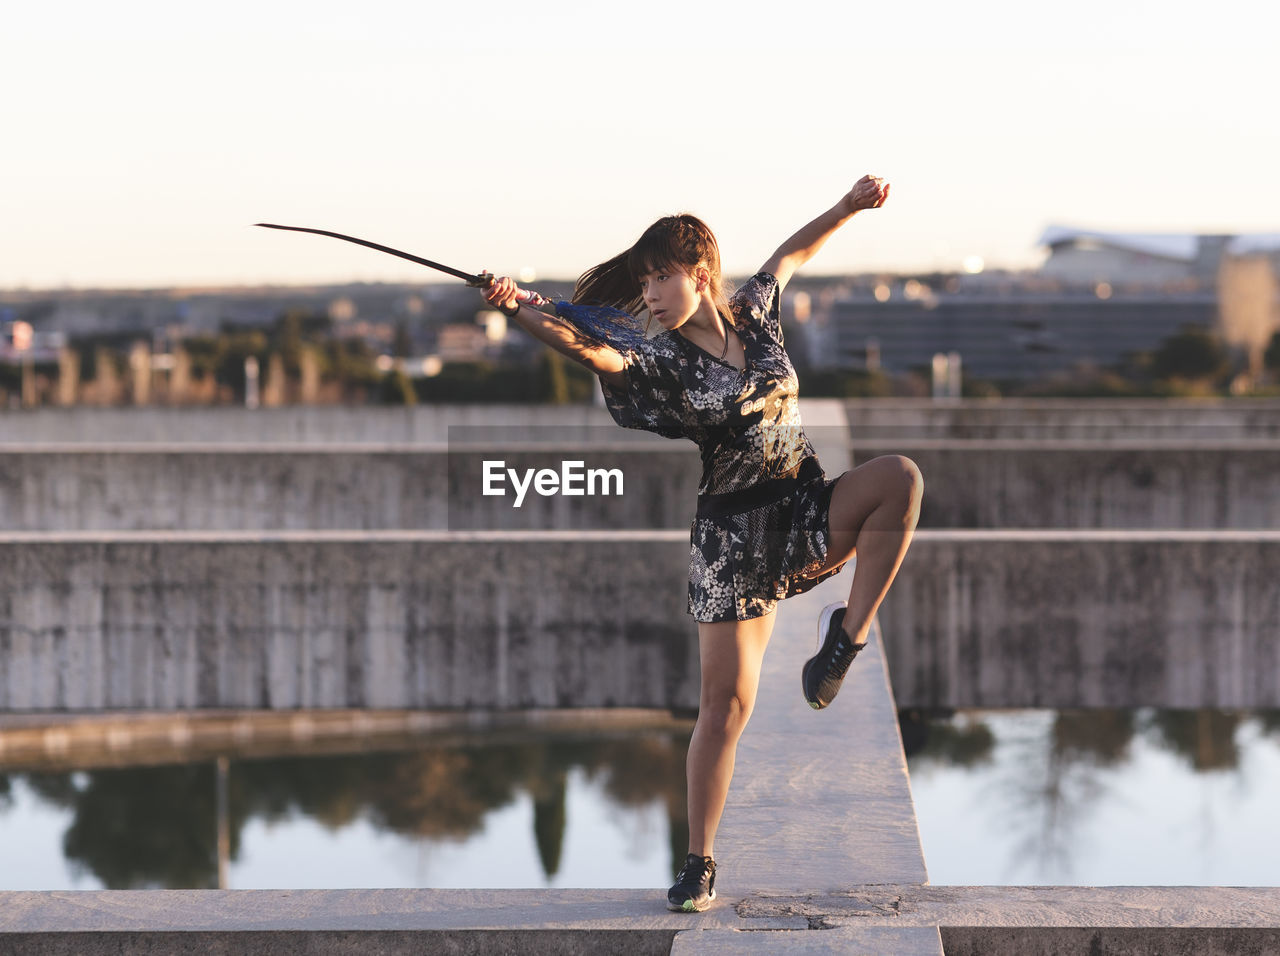 Female athlete practicing sword on structure against clear sky at sunset